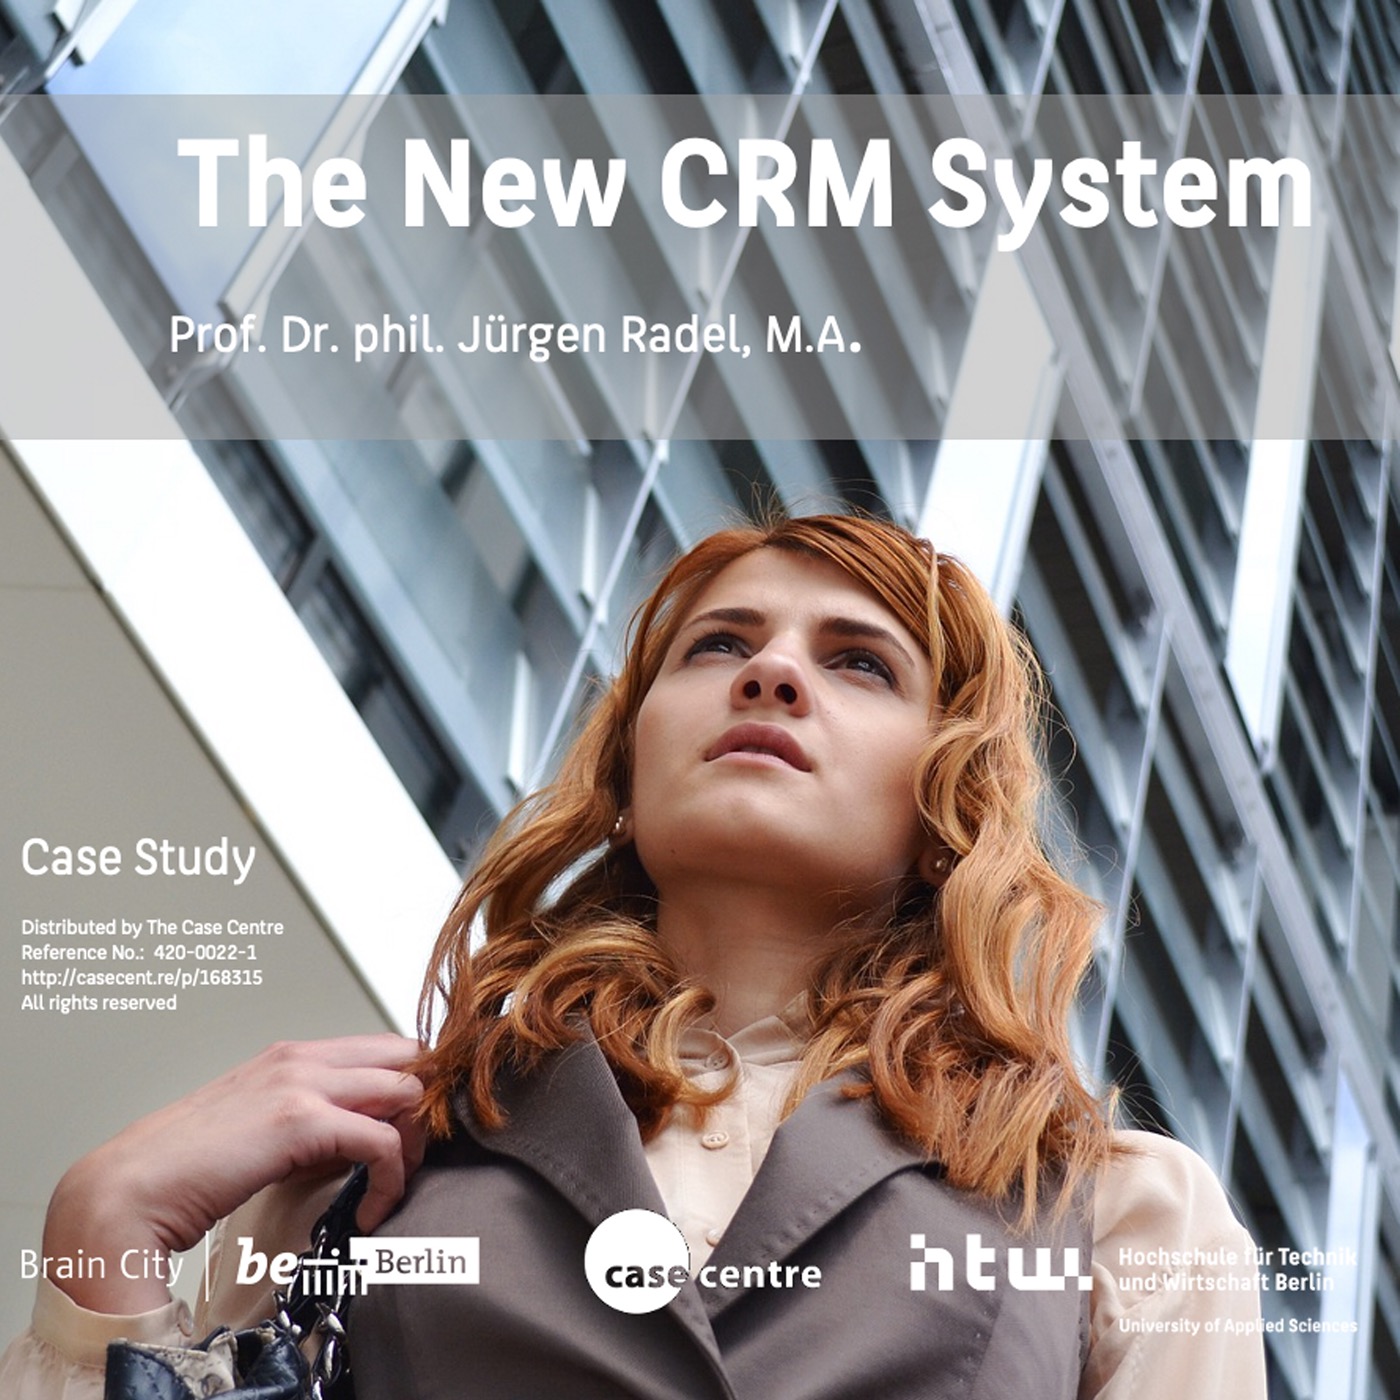 The New CRM System